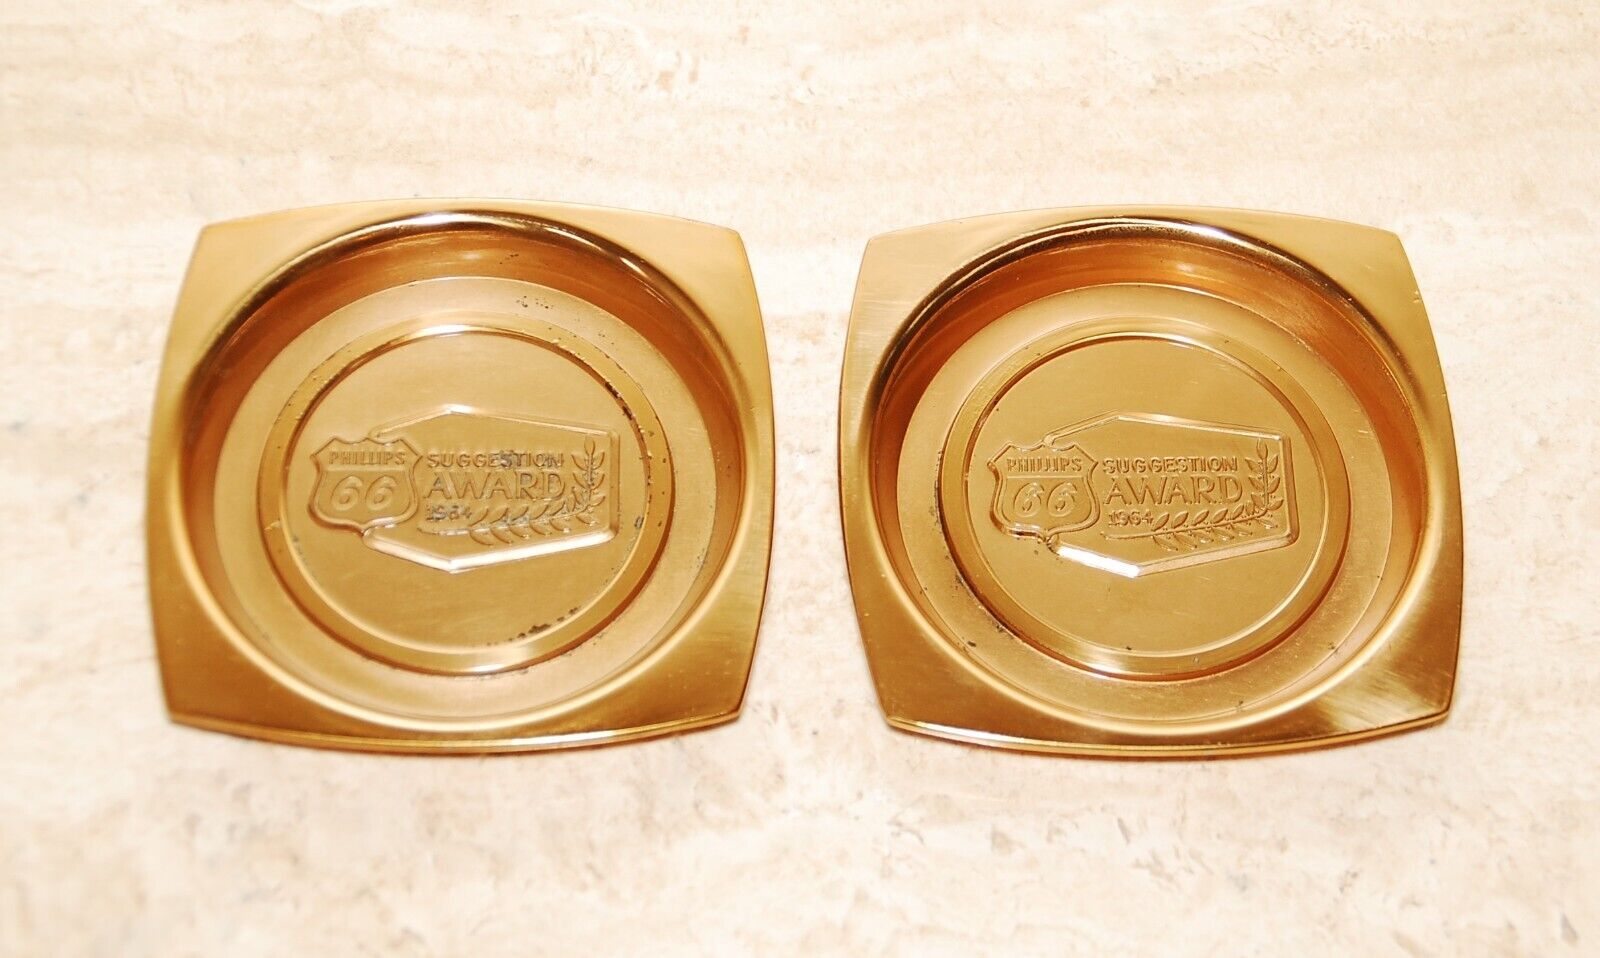 2 Vintage Phillips 66 Gas & Oil Suggestion Award 1964 Metal Ashtray